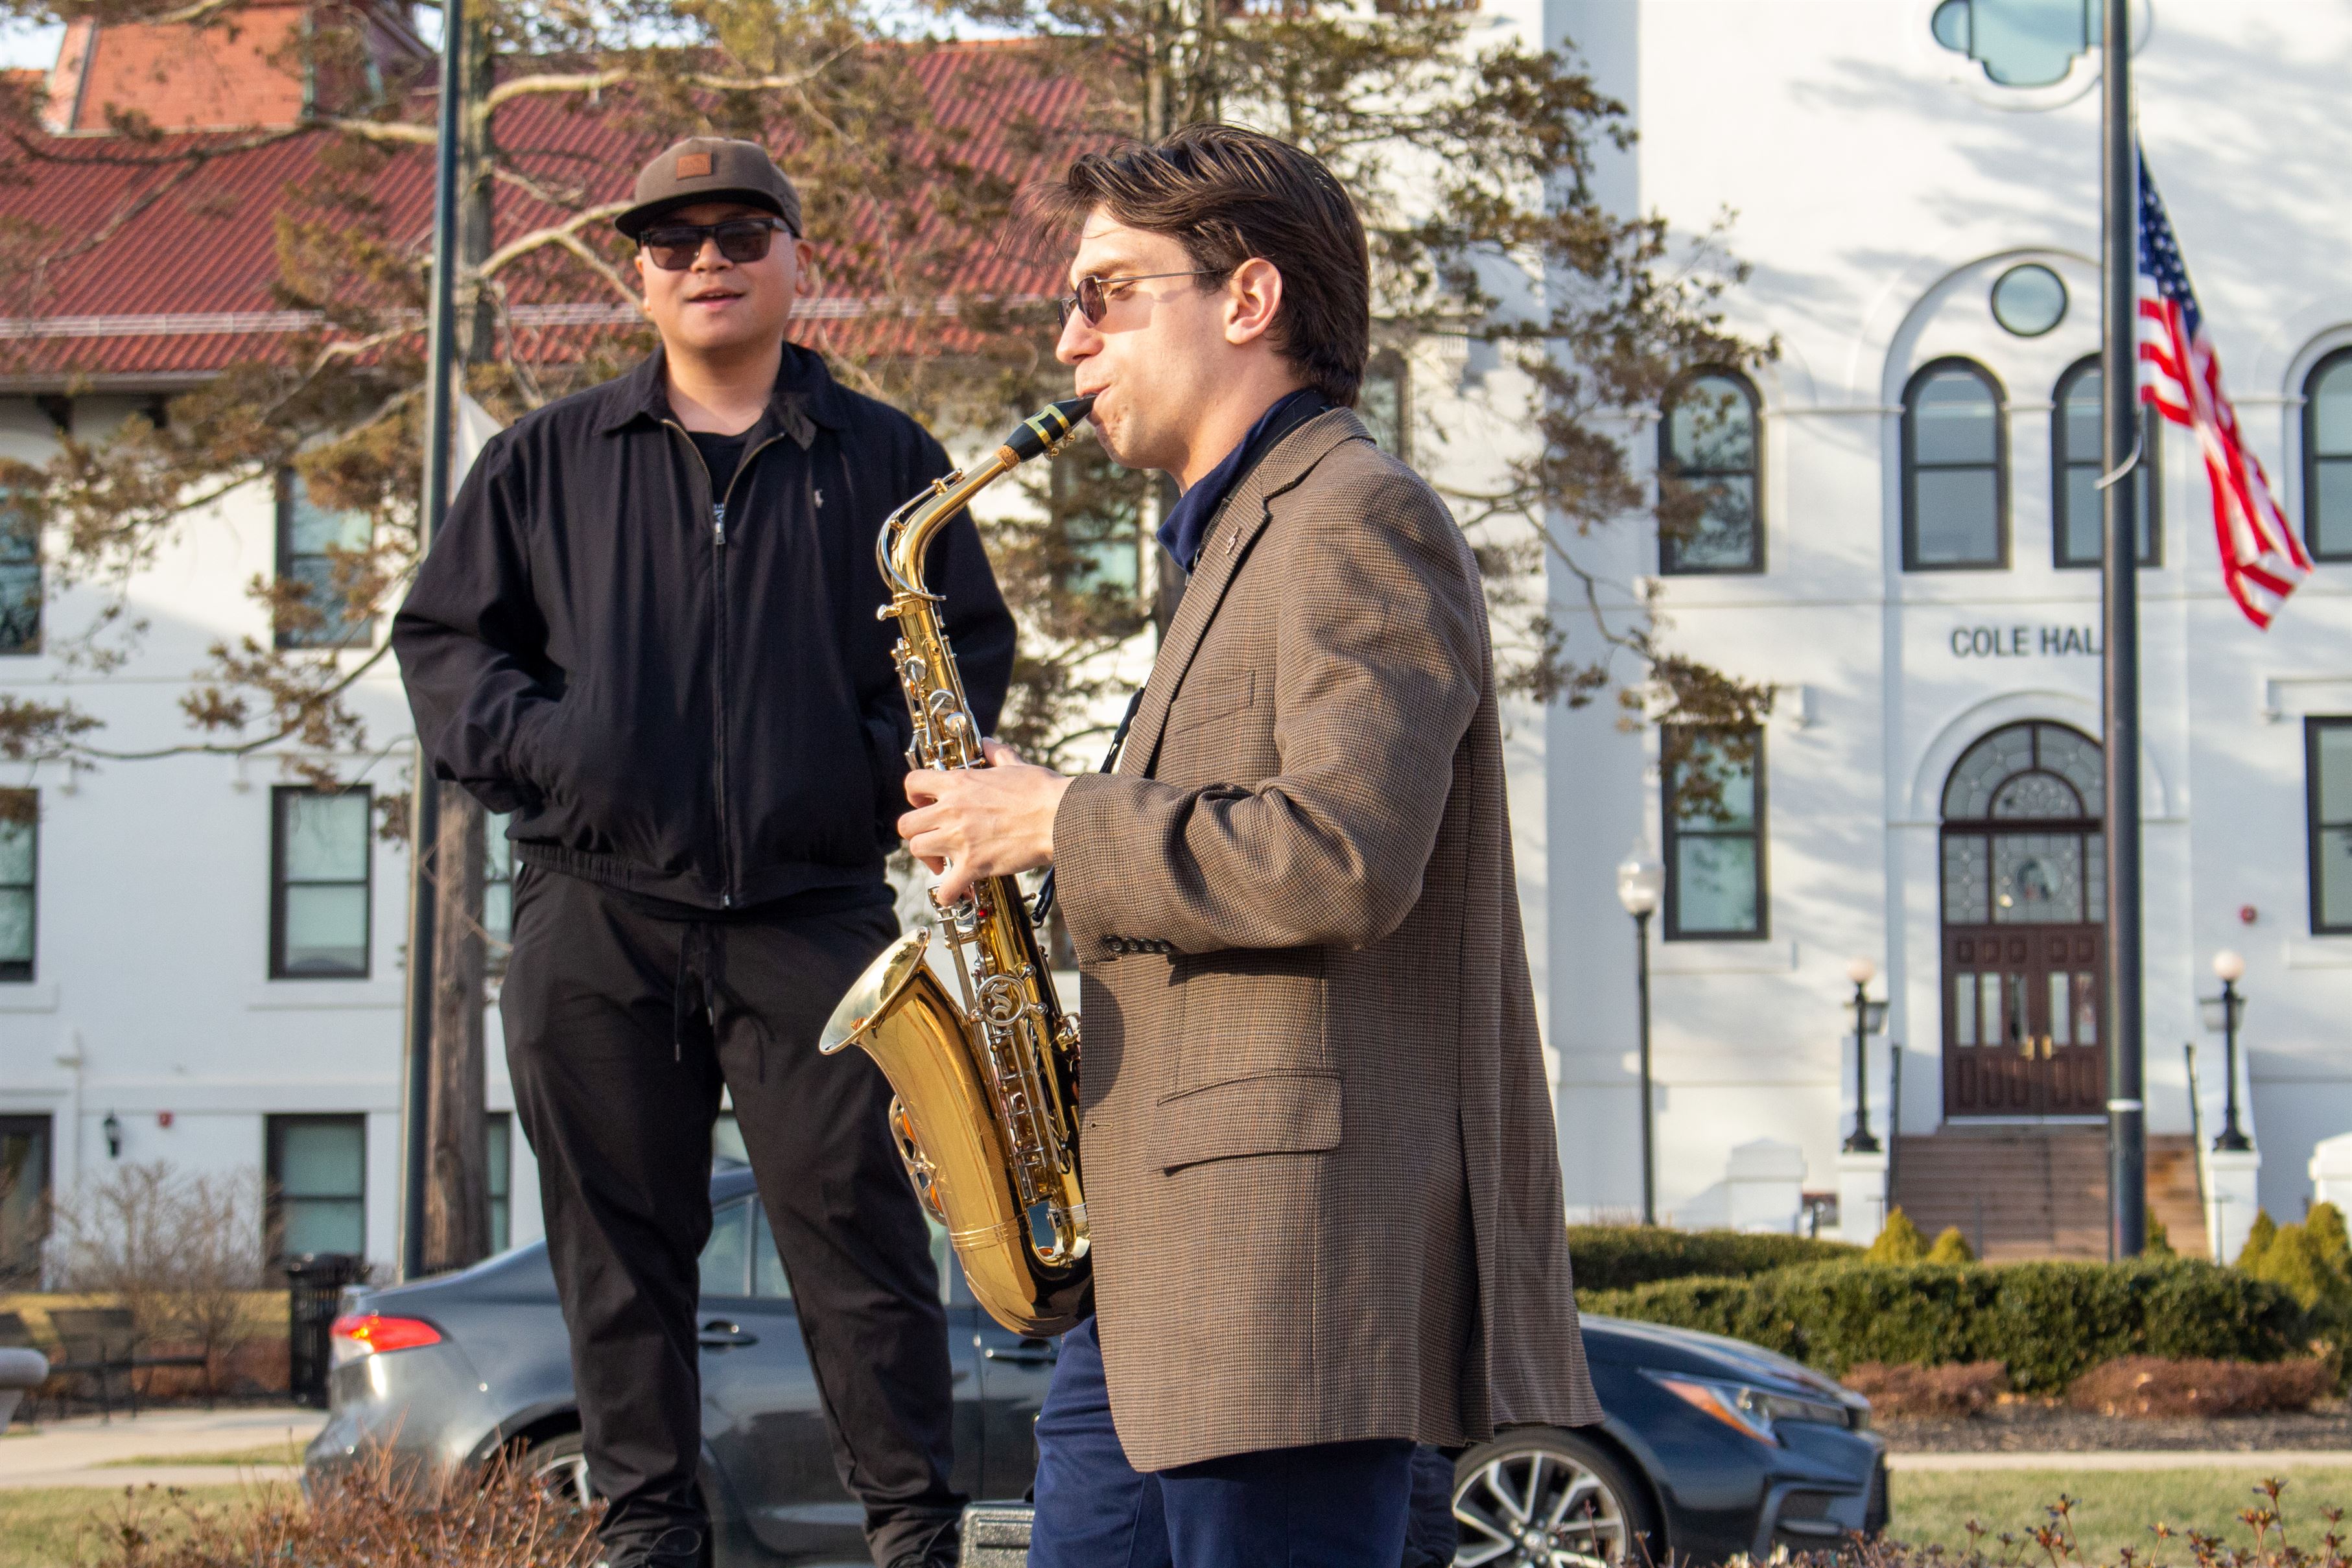 A student plays the saxophone in the Freeman-Russ Quad.
Sal DiMaggio | The Montclarion